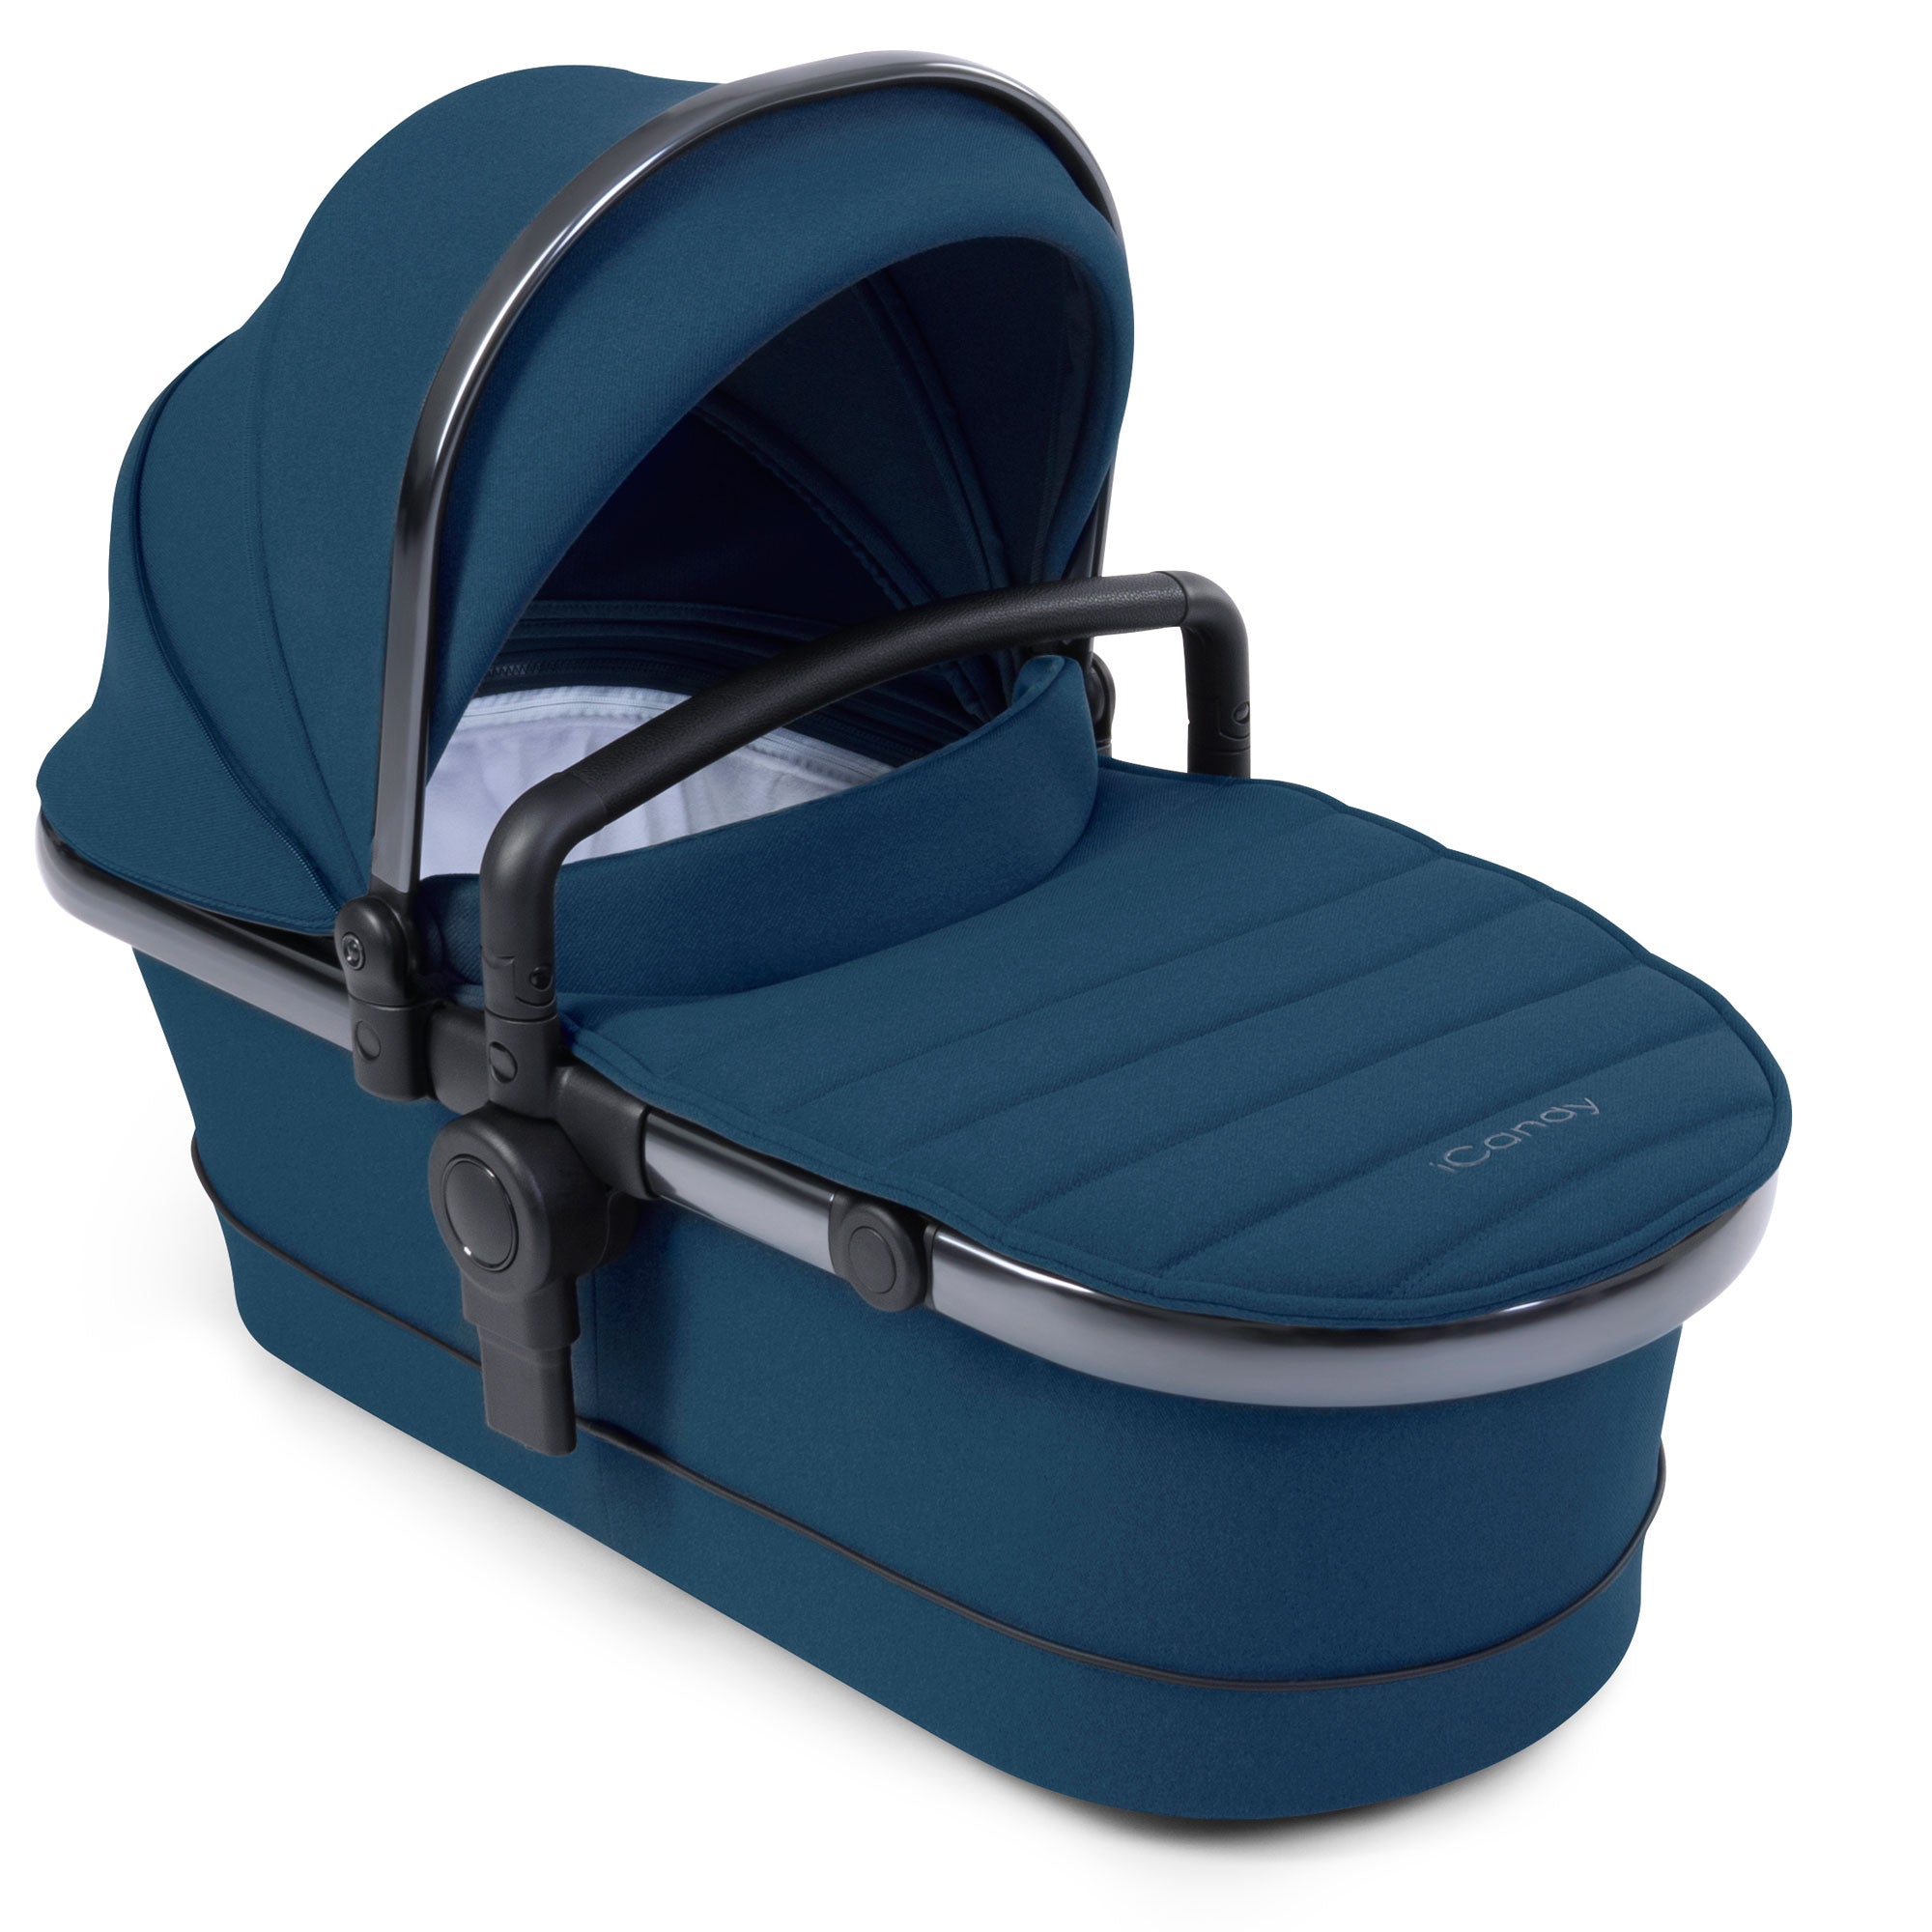 iCandy Peach 7 Complete Bundle with COCOON Car Seat in Cobalt